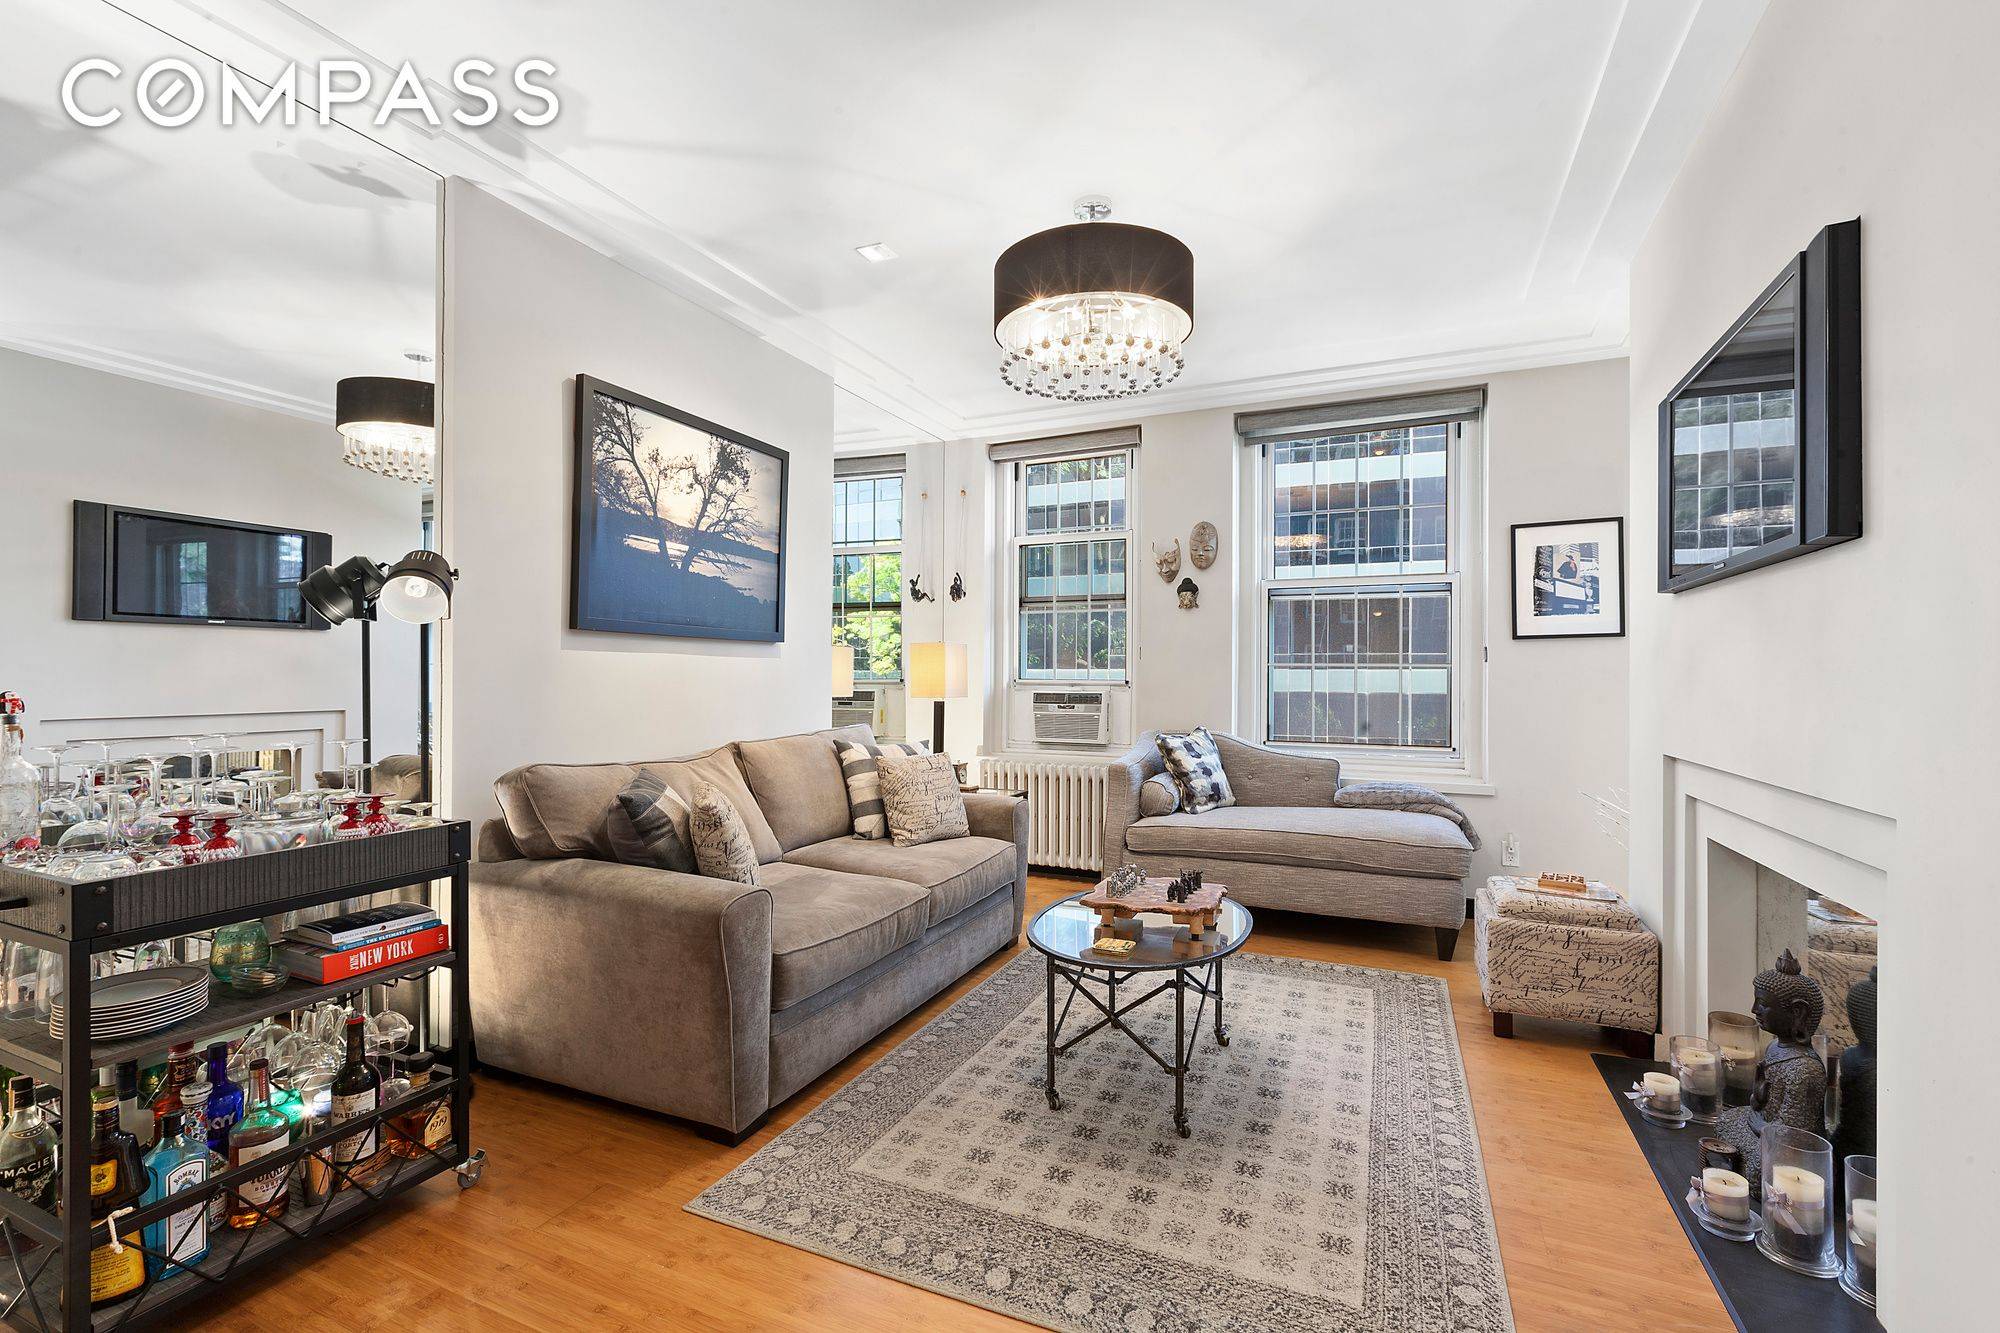 A stylishly renovated one bedroom jewel box at 535 East 72nd Street situated on a quiet cul de sac on East 72nd Street and the East River.